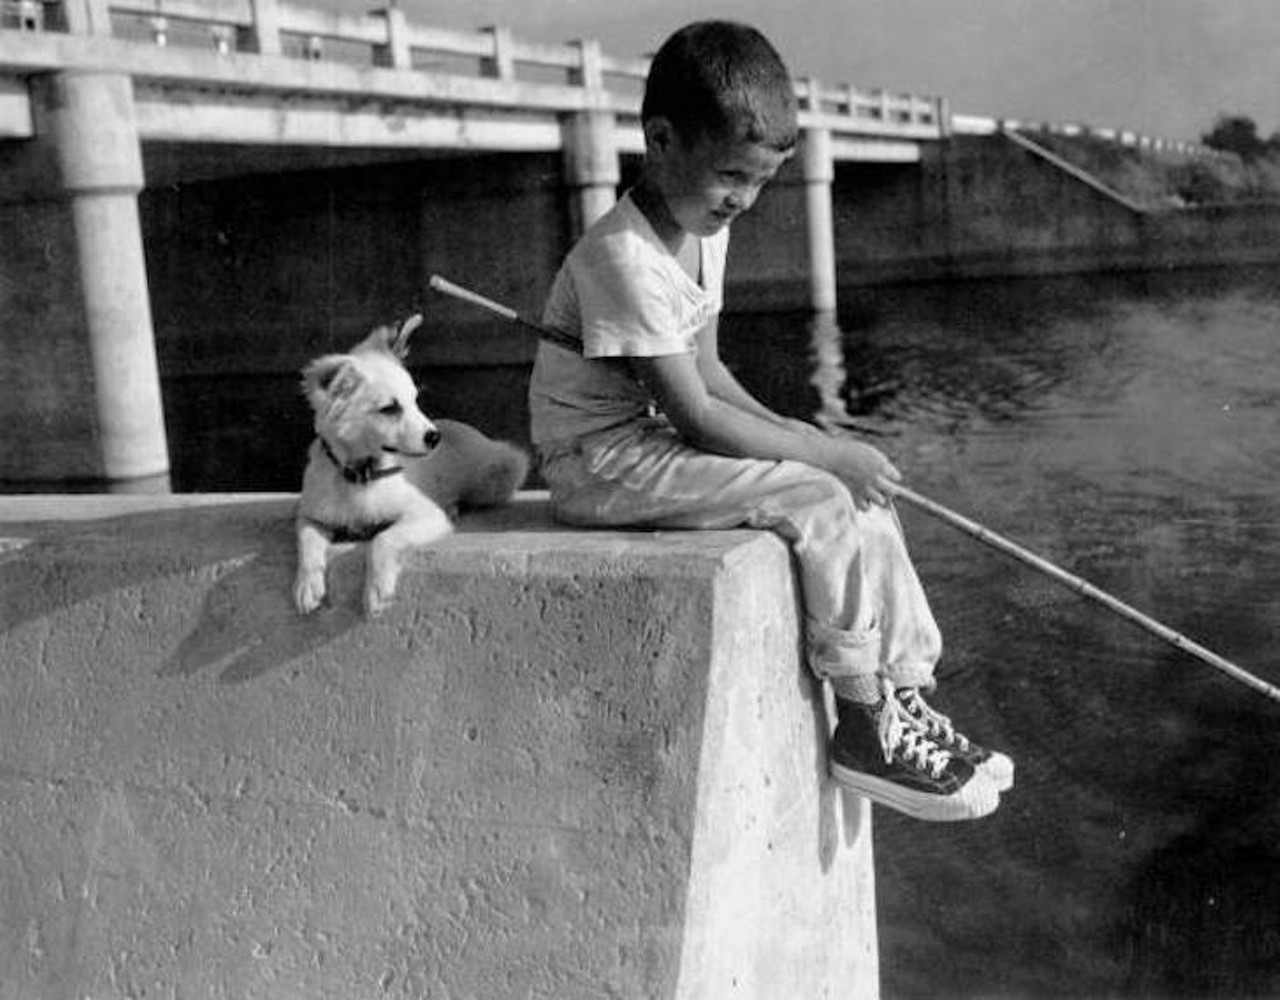 A young boy fishing with his dog in Palm Beach County, Florida, taken sometime in the 1900s.